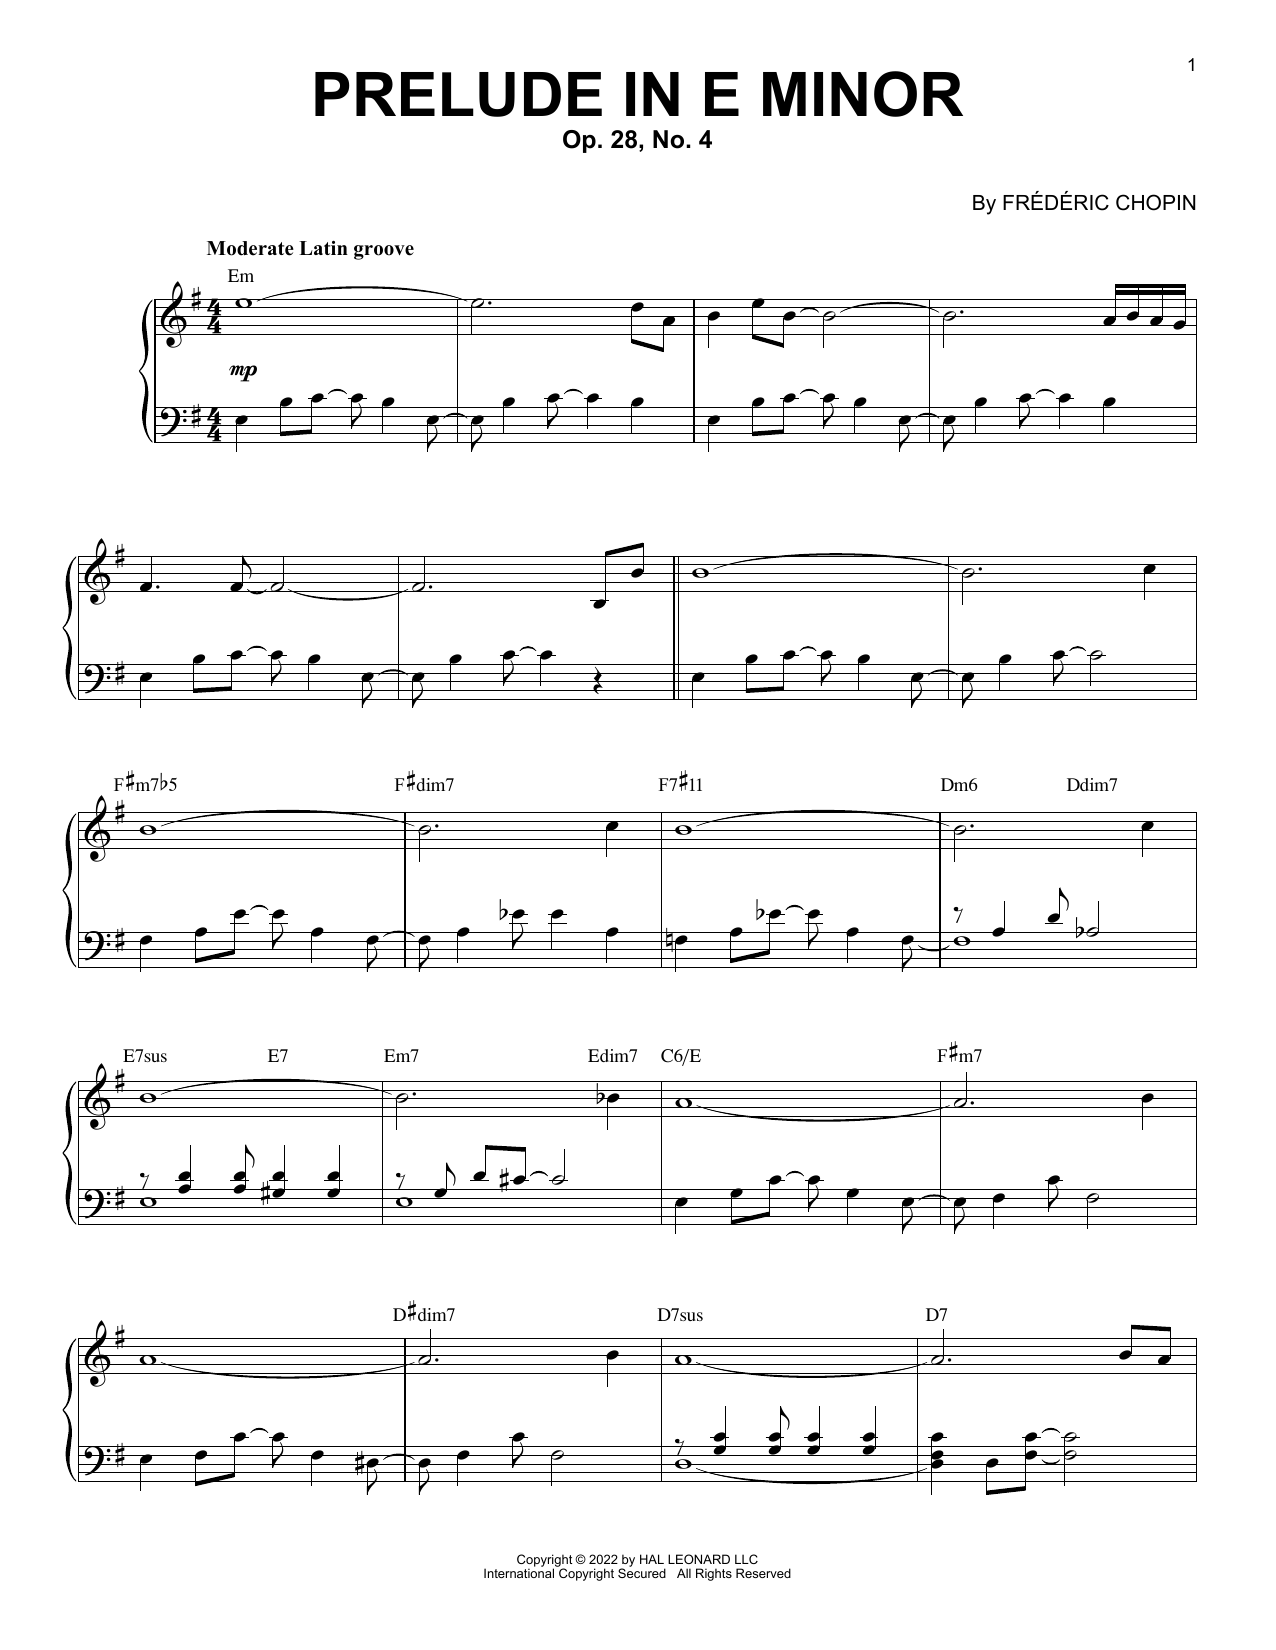 Download Frederic Chopin Prelude In E Minor, Op. 28, No. 4 [Jazz Sheet Music